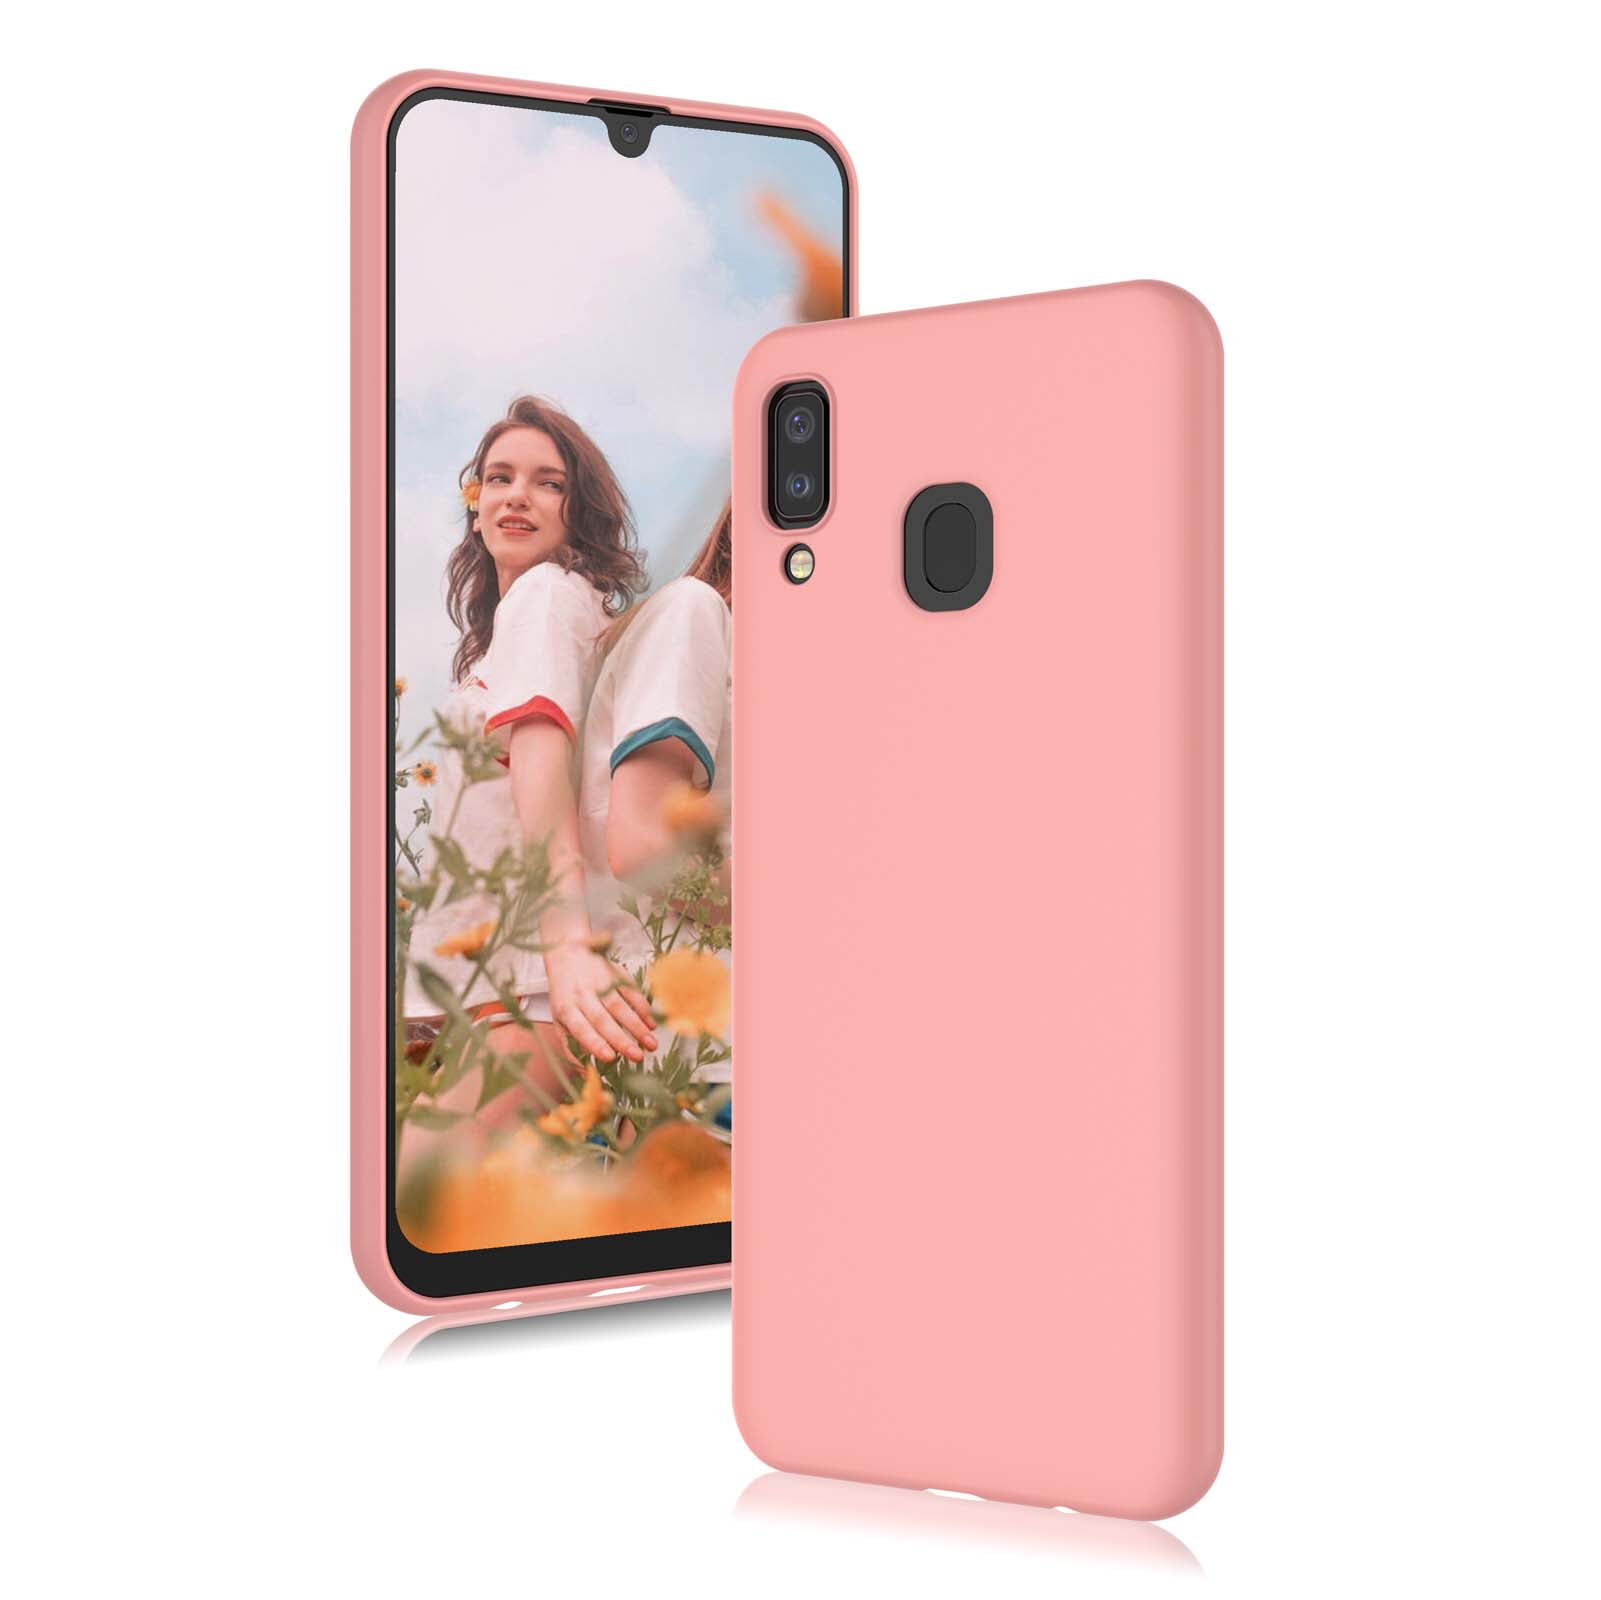 Fejlfri badminton Byblomst Cell Phone Cases For 6.4" Galaxy A20, Galaxy A30 Phone Case, Njjex  Shockproof Case Ultra Thin Galaxy A20 Case Slim Matte Surface Cover For  2019 Samsung A20 A30 -Pink - Walmart.com